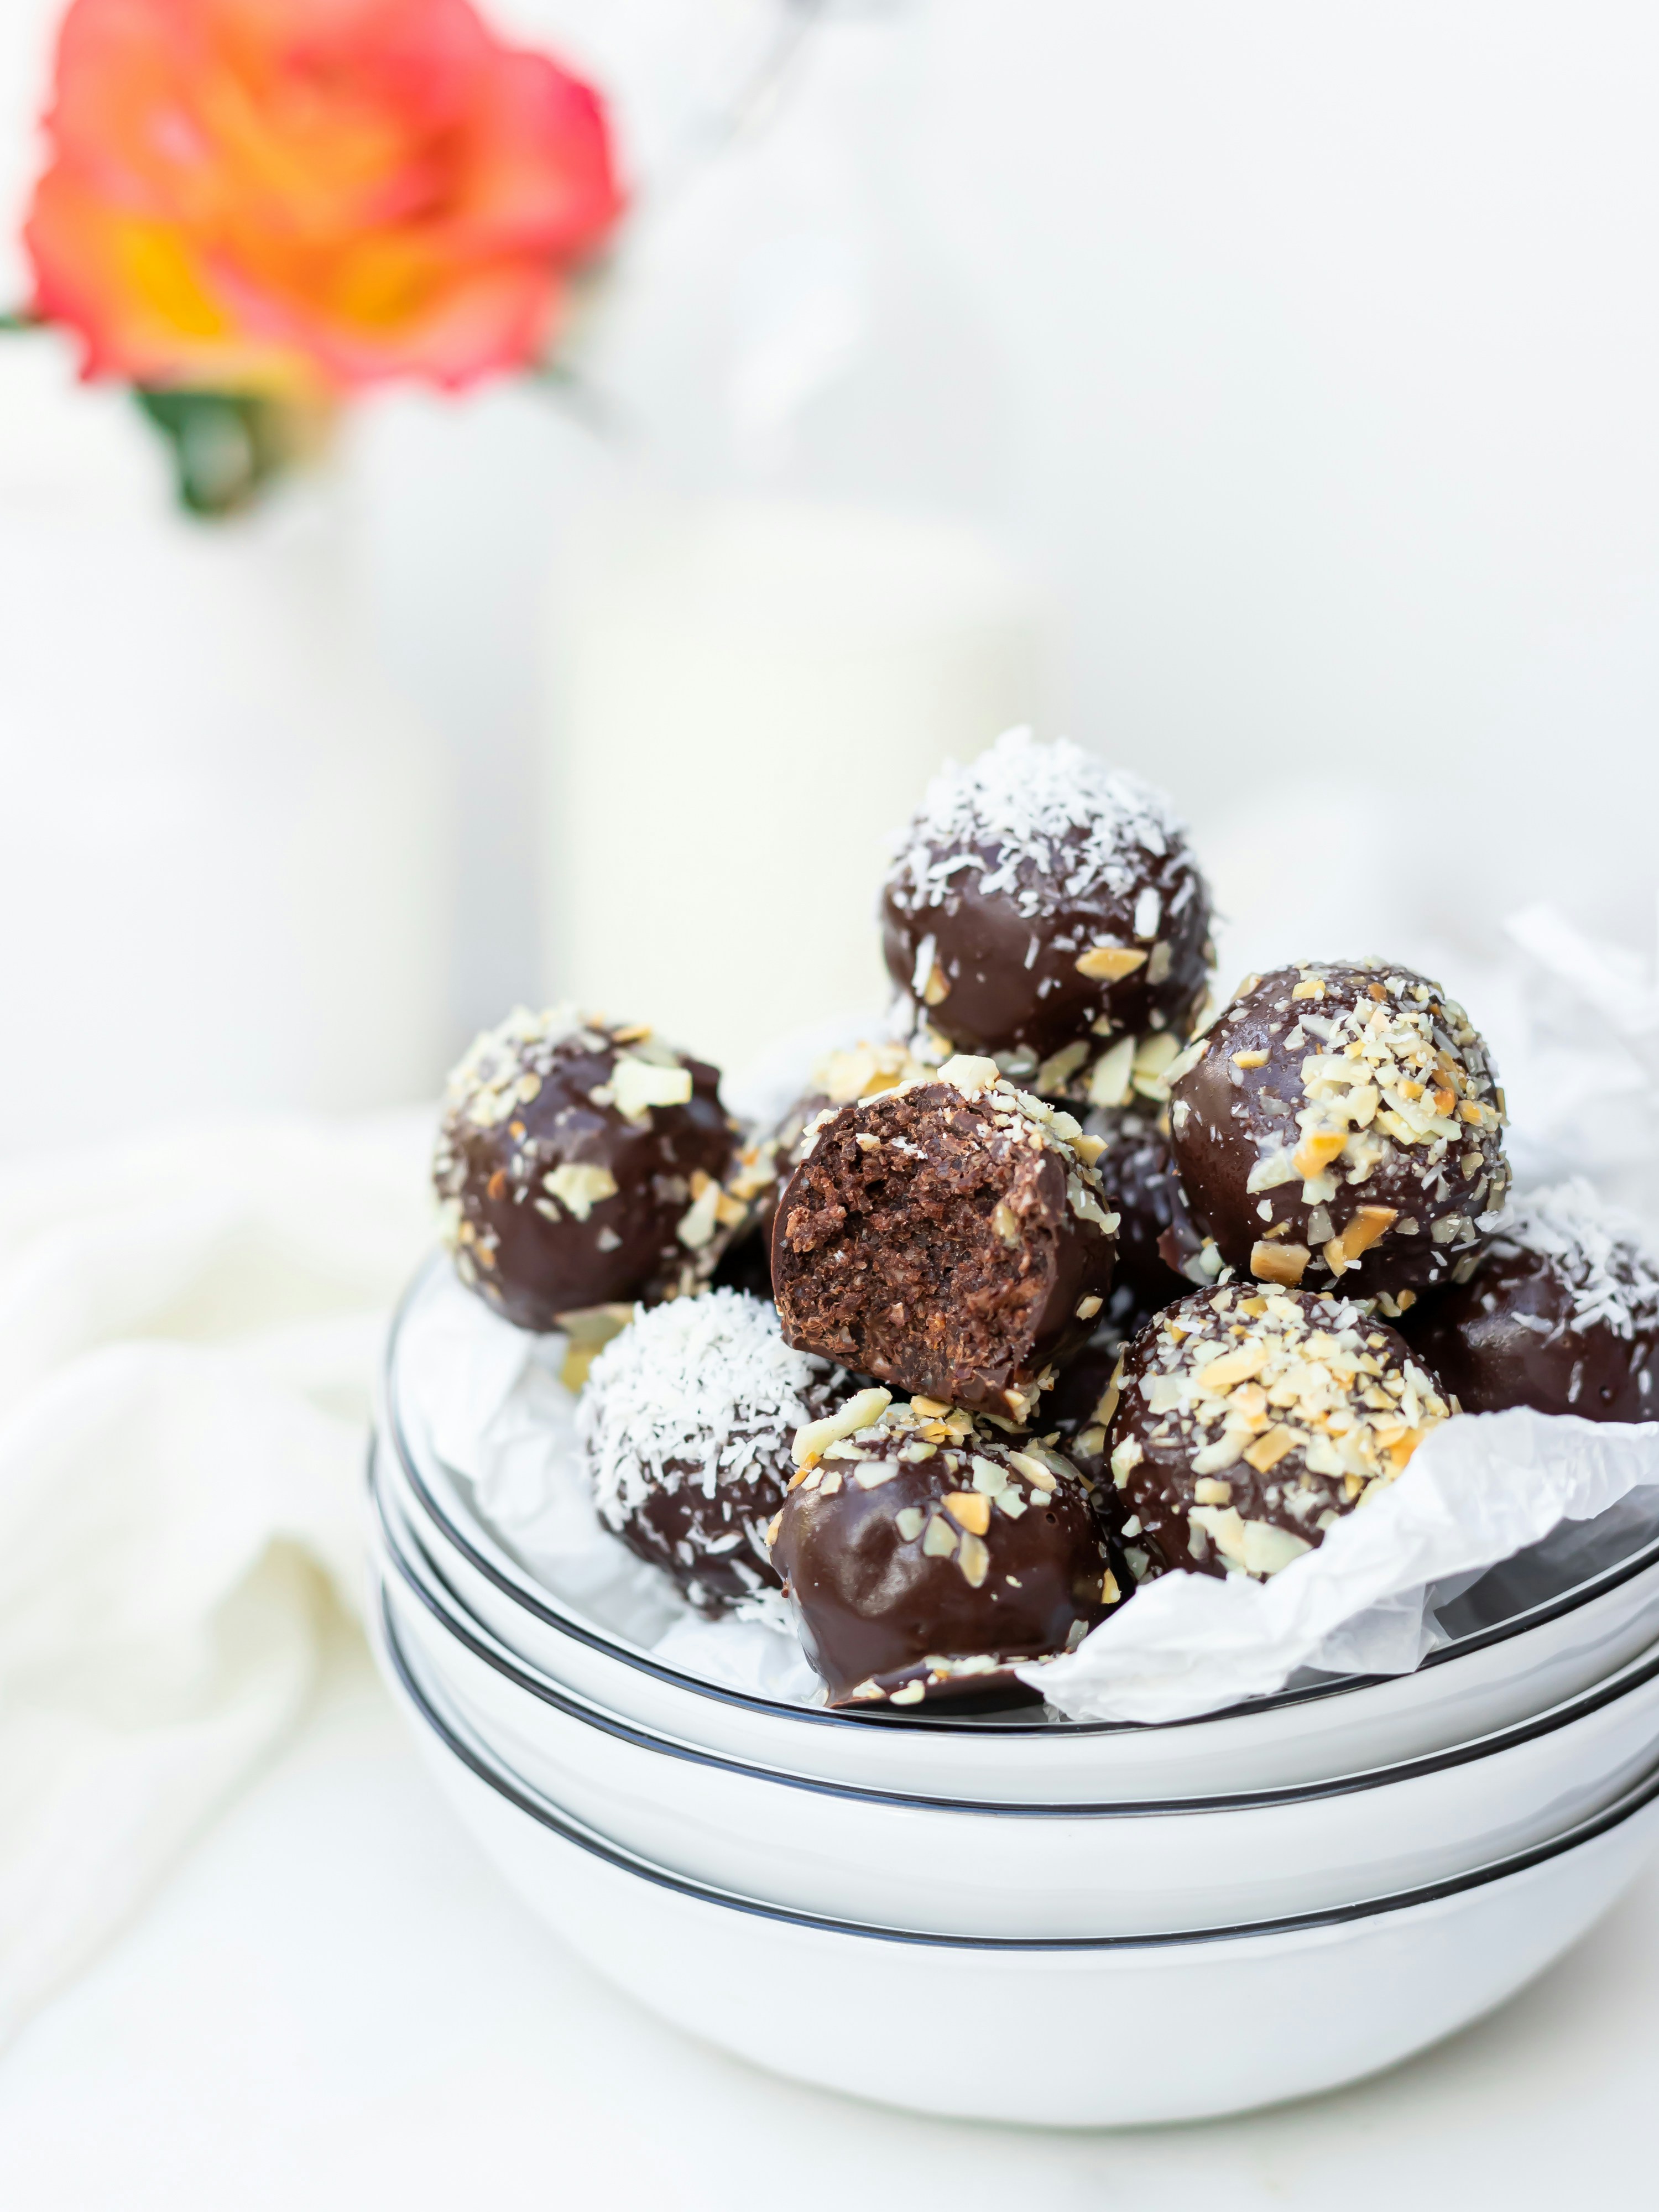 these bite-sized chocolate bliss balls are full of healthy goodness. And are delicious, of course